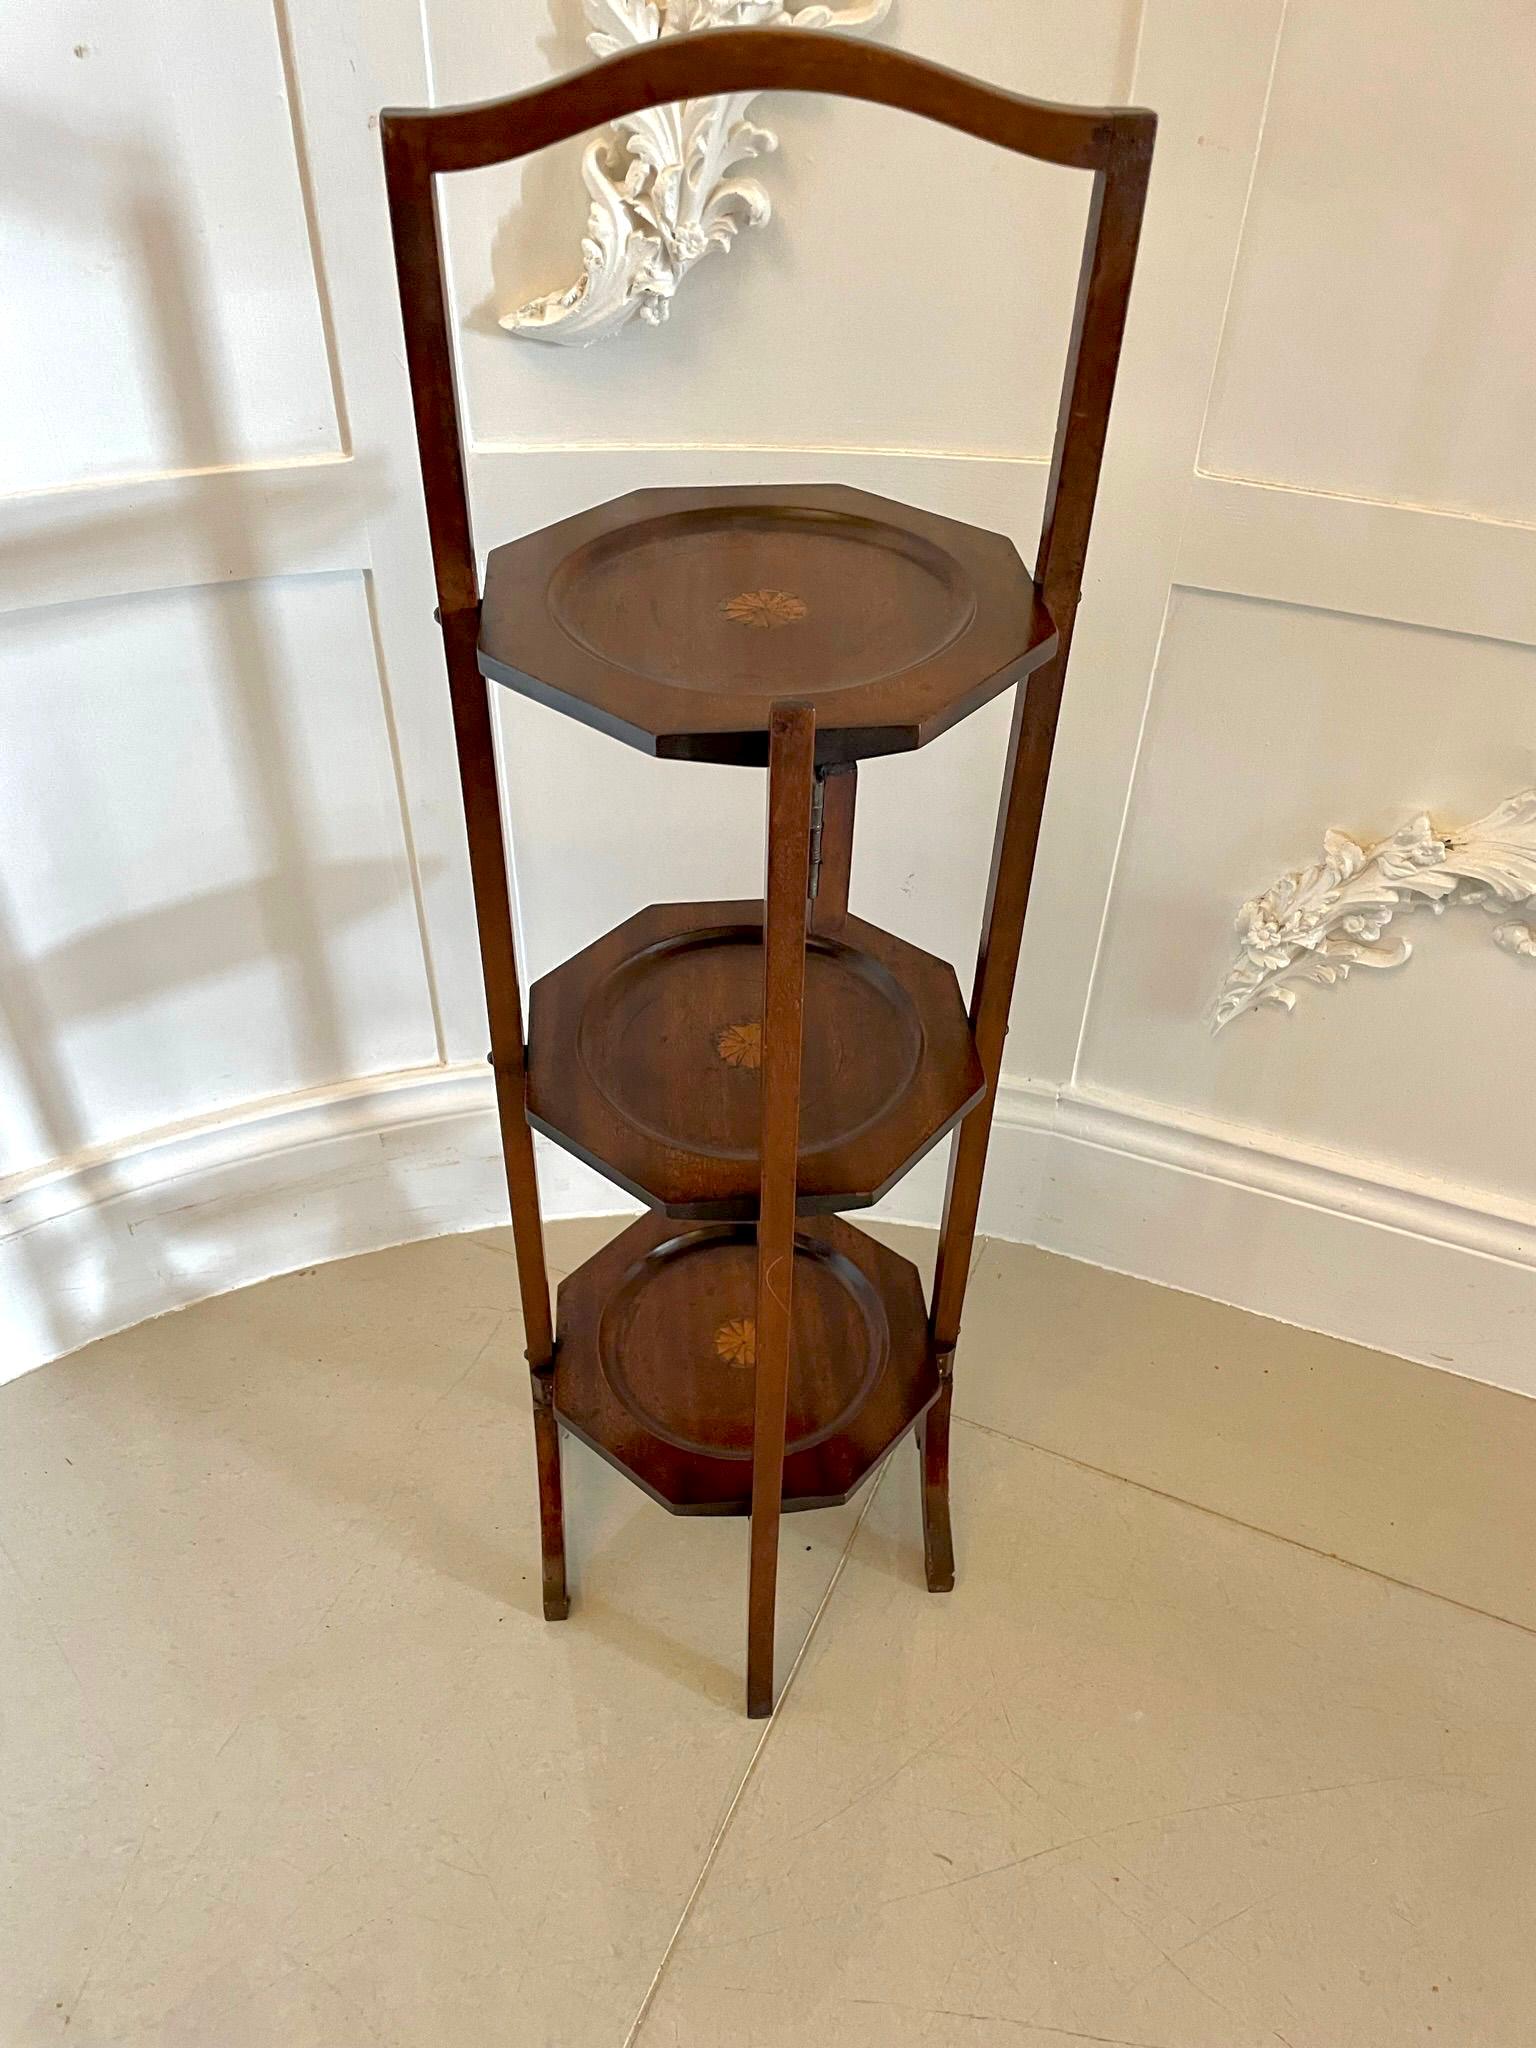 Inlay Antique Edwardian Inlaid Mahogany 3 Tier Cake Stand For Sale